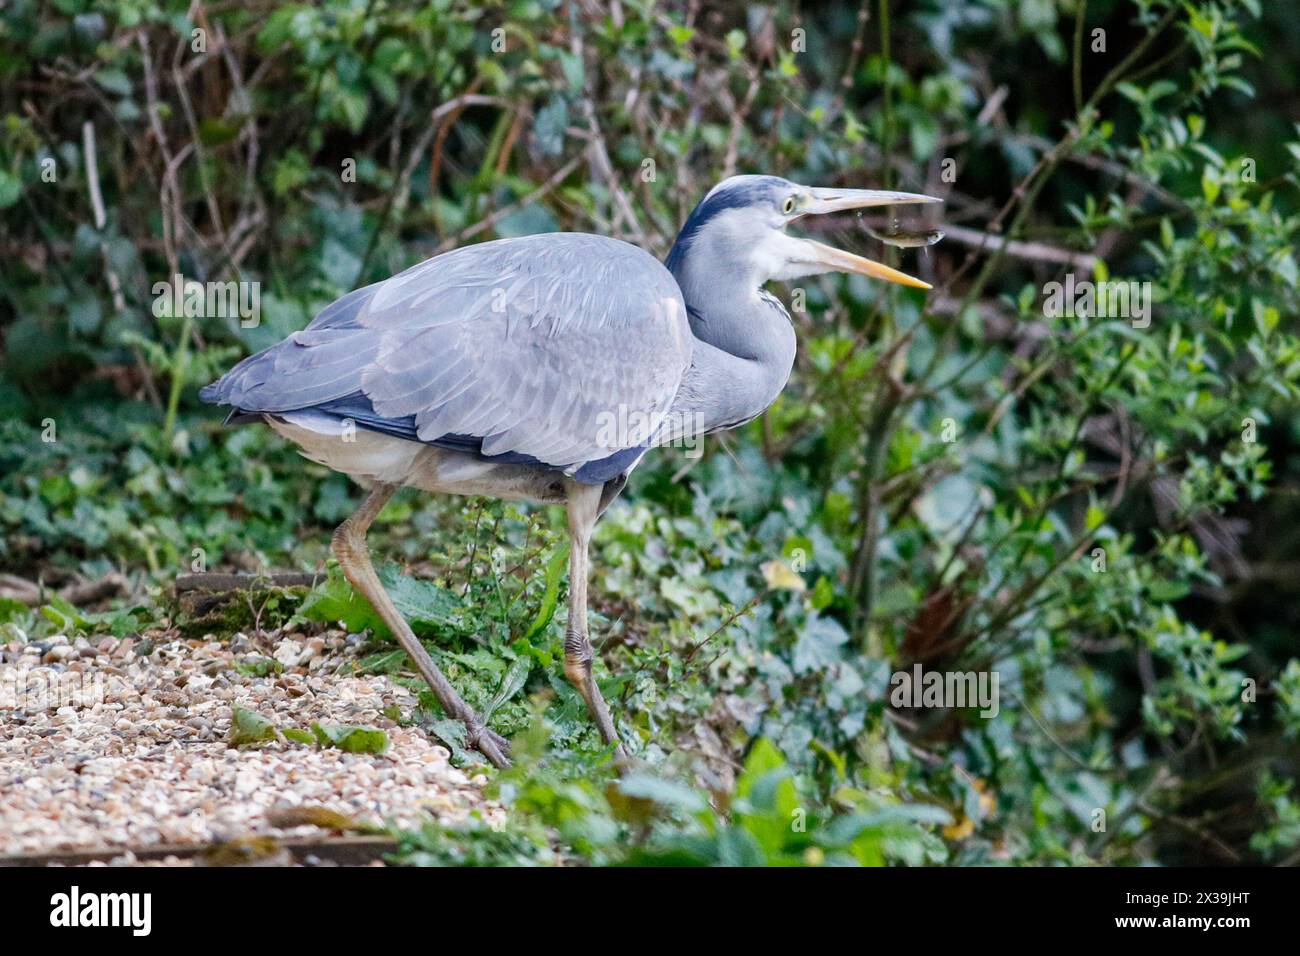 Brittens Pond, Worplesdon. 25th April 2024. Cloudy weather across the Home Counties this afternoon with isolated showers. A grey heron fishing at Brittens Pond in Worplesdon near Guildford in Surrey. Credit: james jagger/Alamy Live News Stock Photo